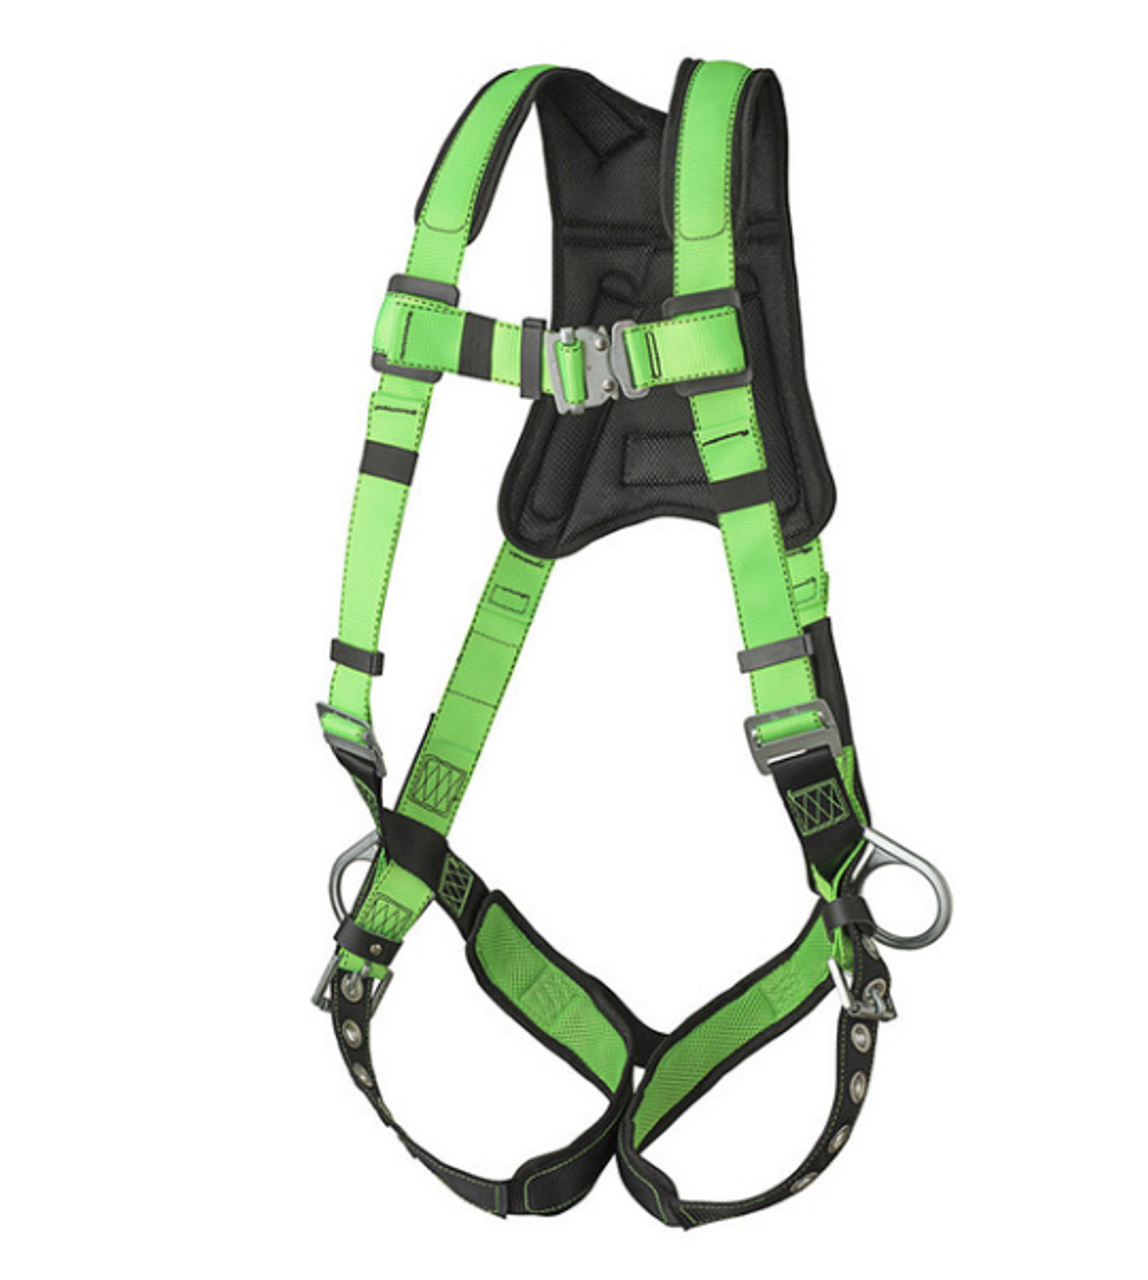 FBH-60120B PEAKPRO HARNESS - 3D - CLASS AP - STAB LOCK CHEST BUCKLE